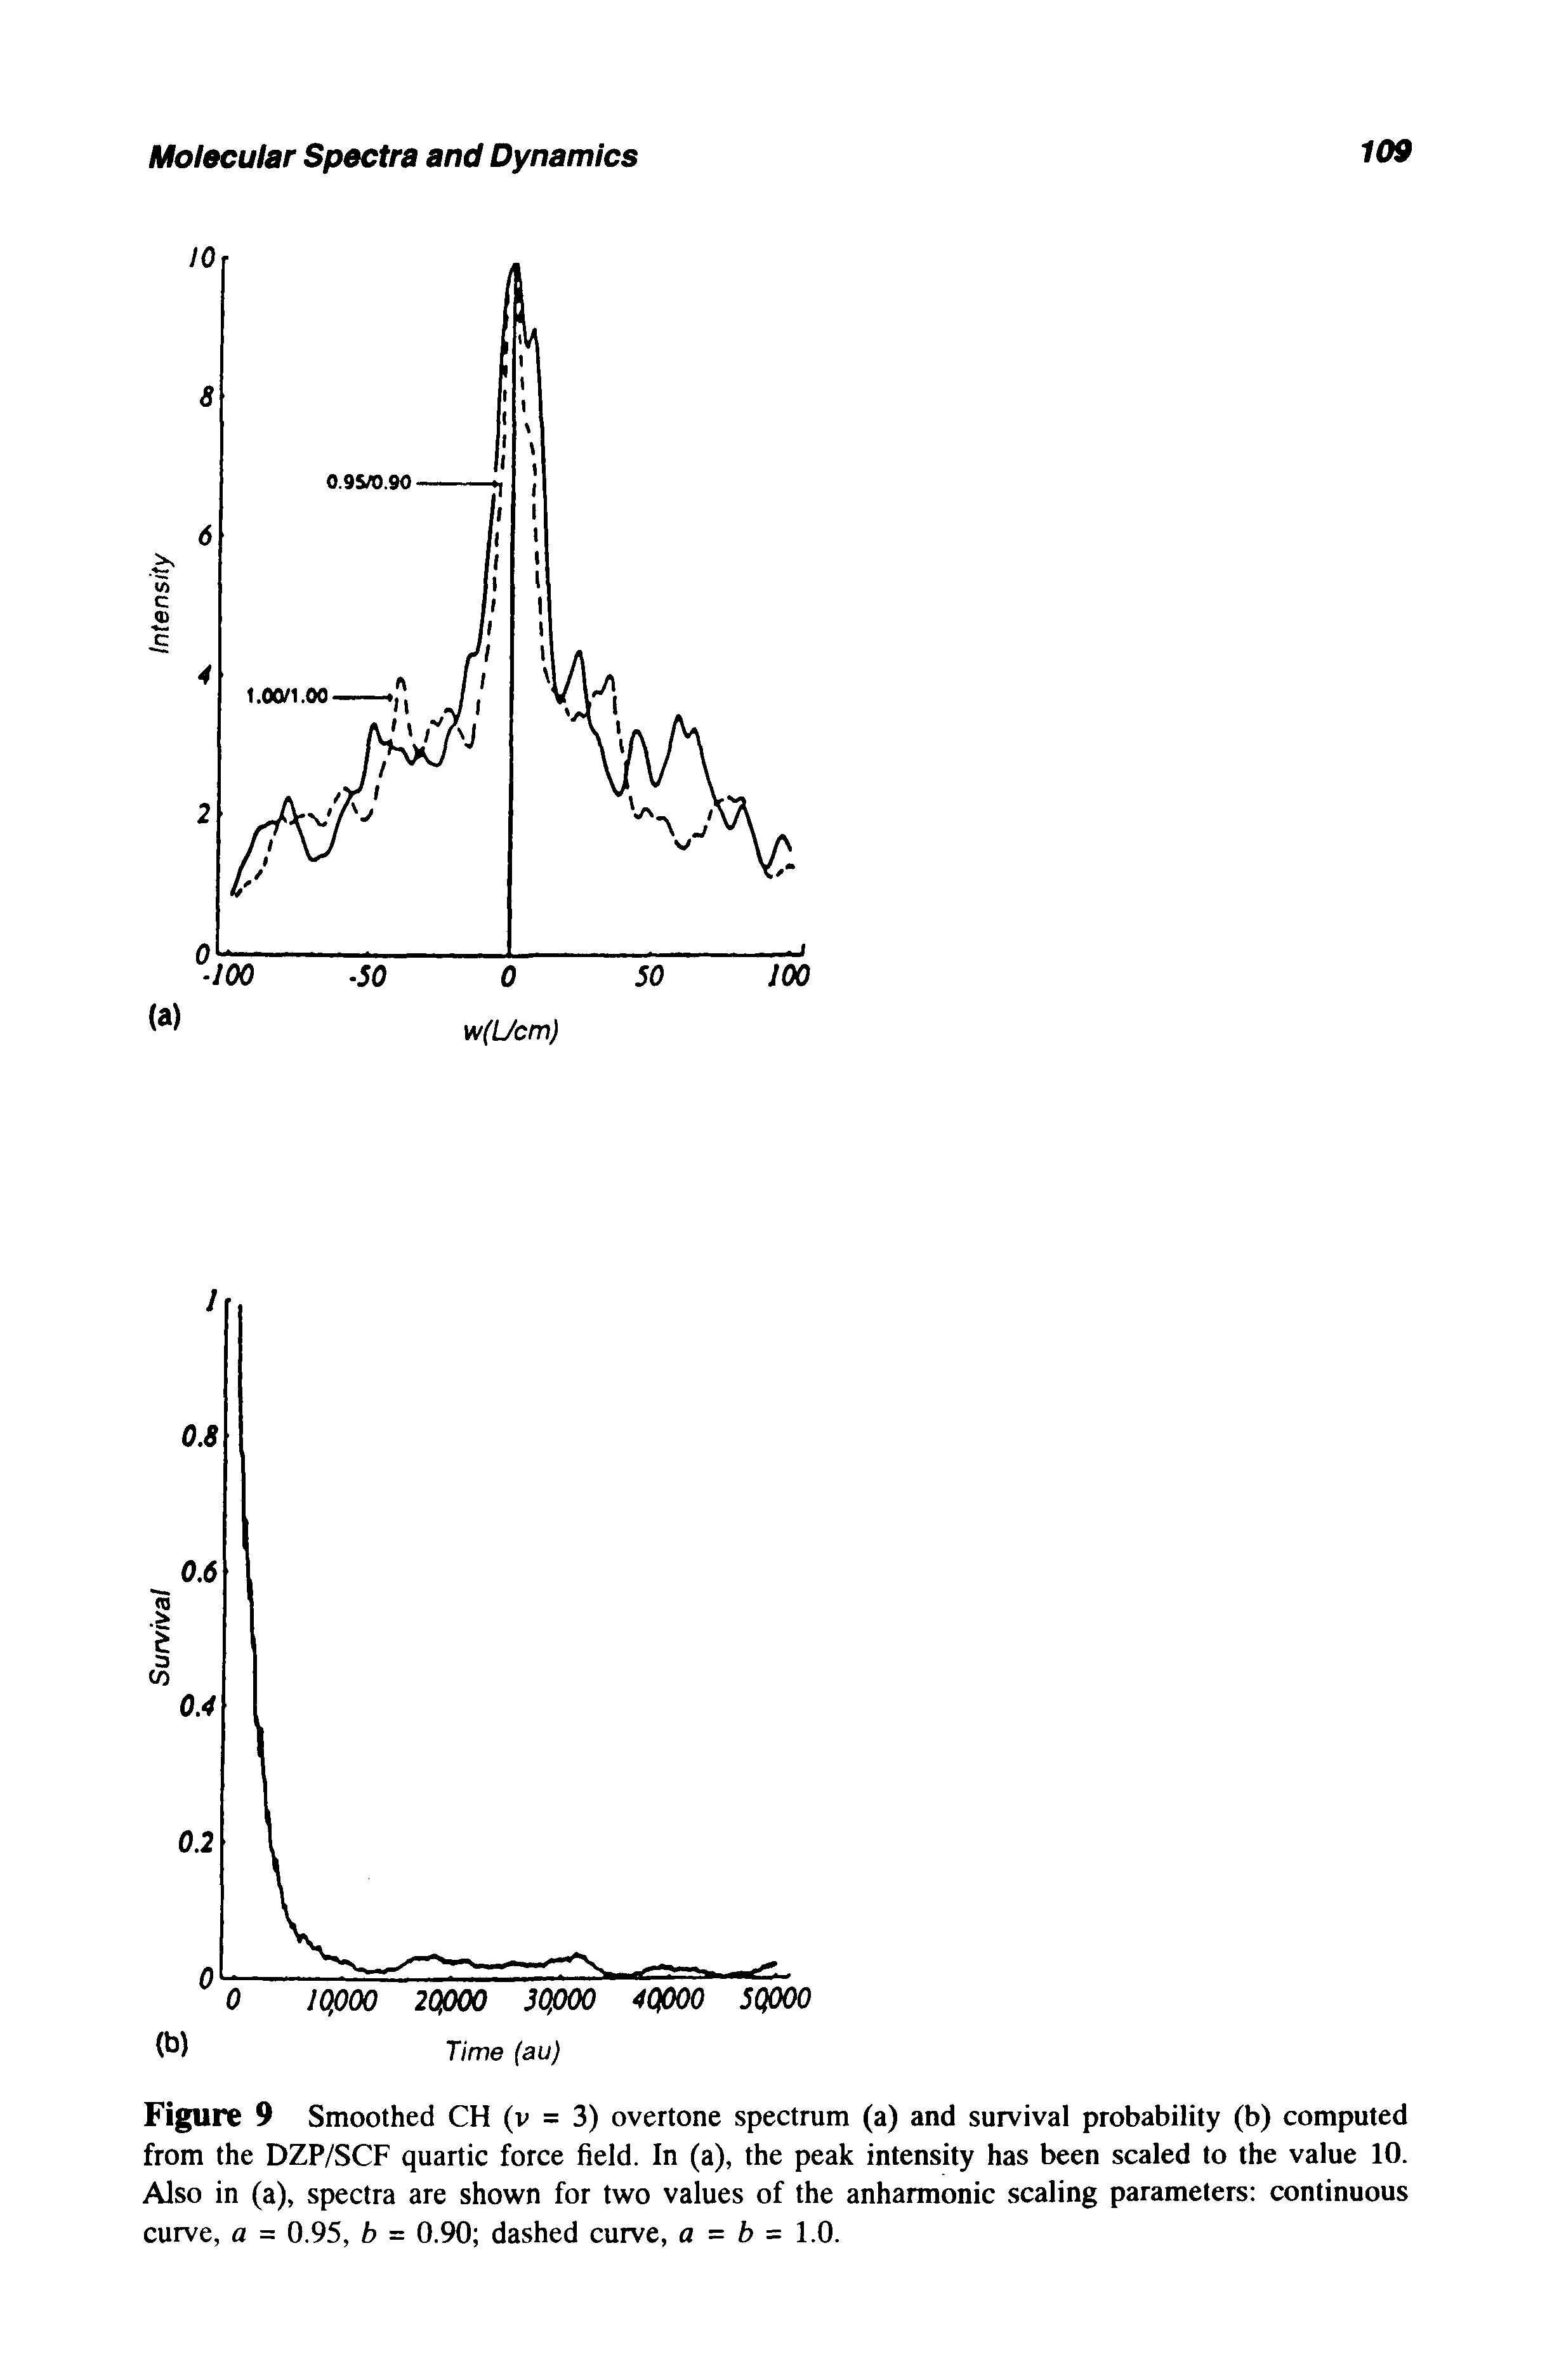 Figure 9 Smoothed CH (v = 3) overtone spectrum (a) and survival probability (b) computed from the DZP/SCF quartic force field. In (a), the peak intensity has been scaled to the value 10. Also in (a), spectra are shown for two values of the anharmonic scaling parameters continuous curve, a = 0.95, b = 0.90 dashed curve, a = b = 1.0.